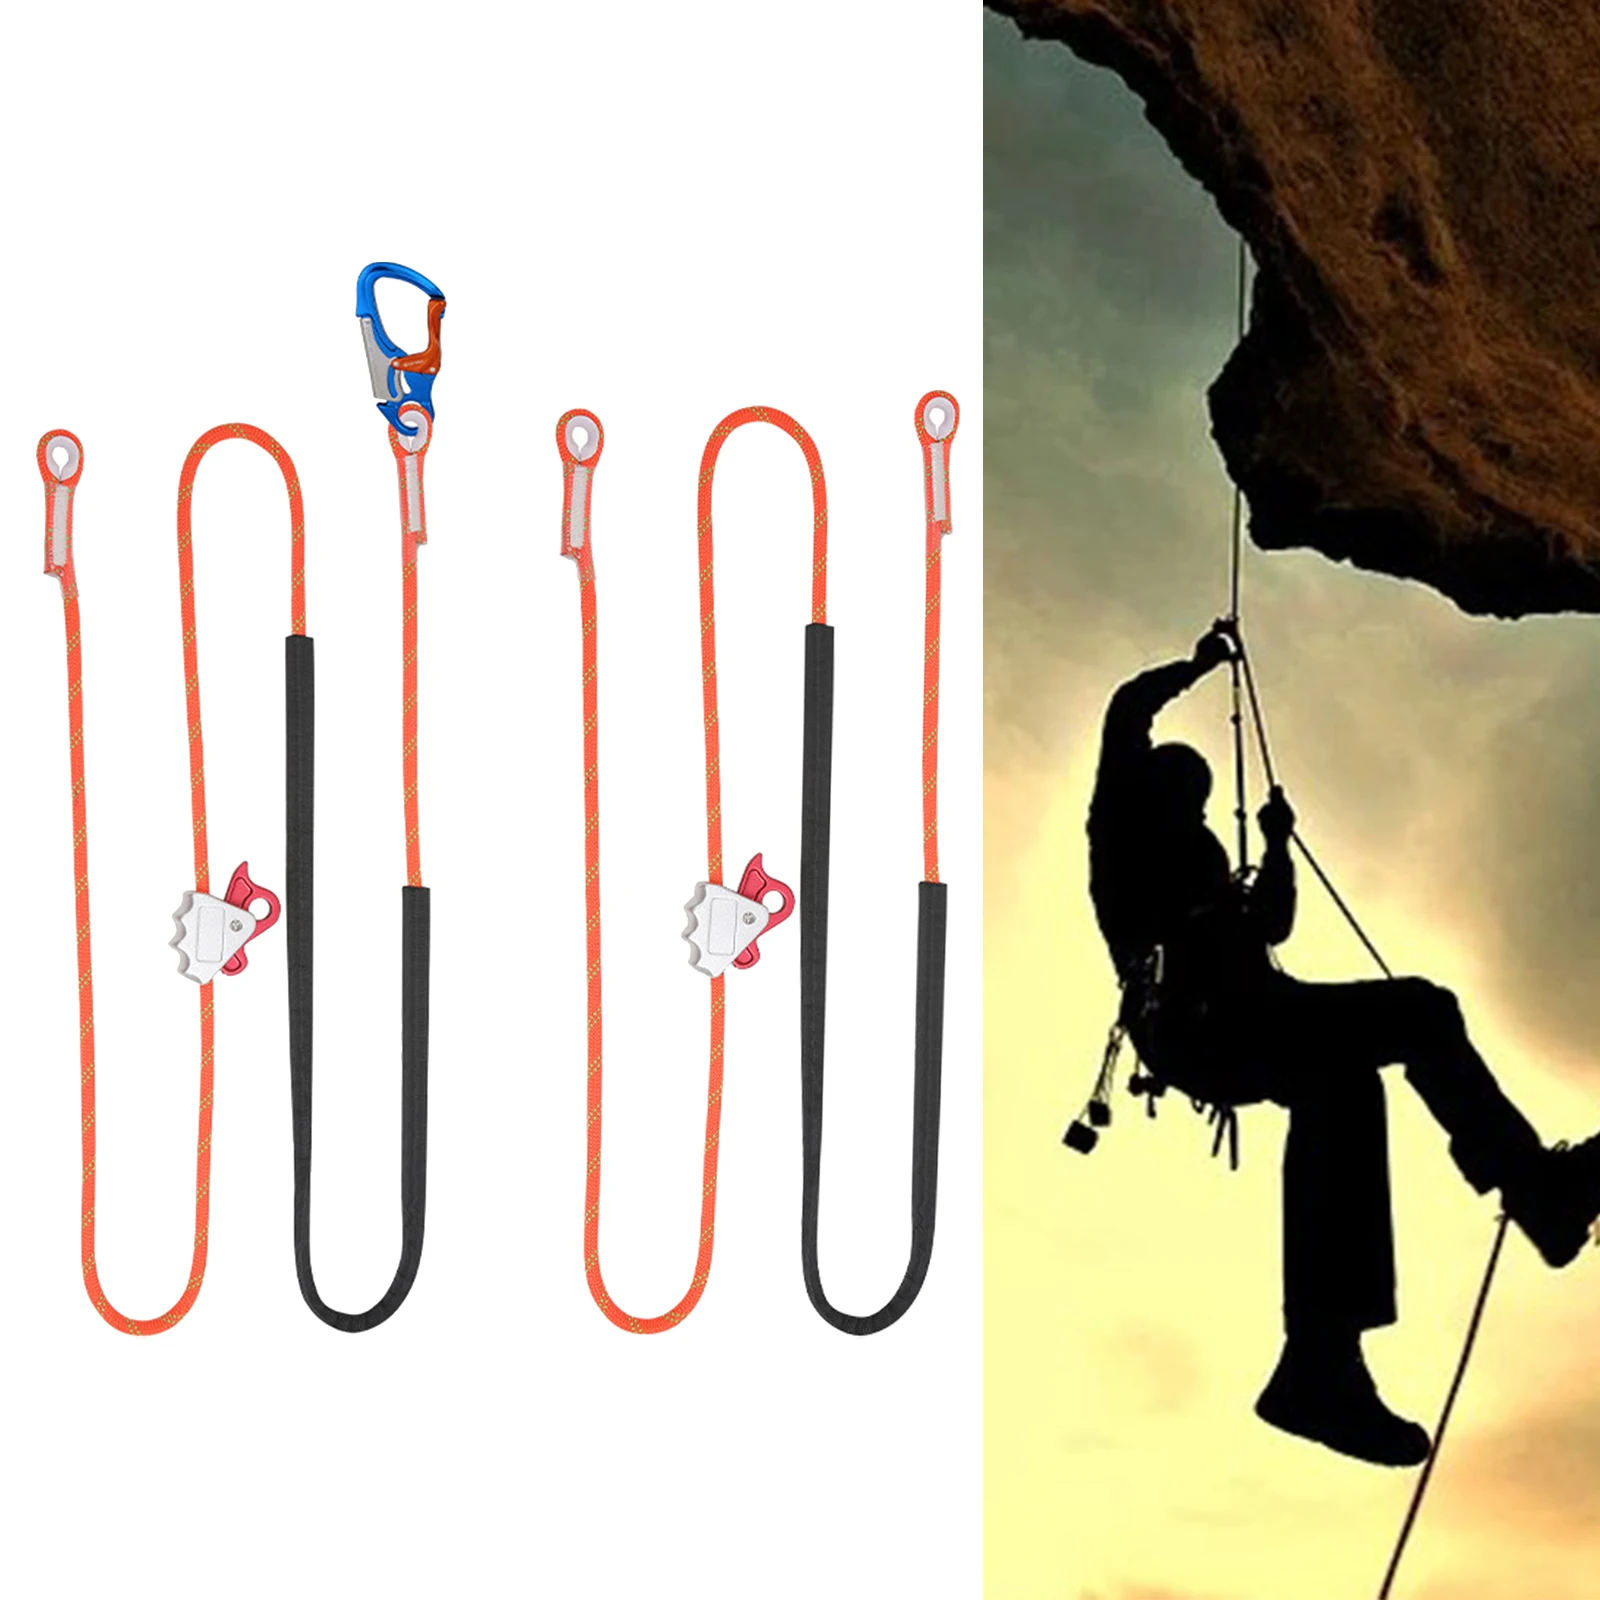 Outdoor Positioning Lanyard with Sturdy Rope Adjustable Restraint Harness Cord for Rock/Tree Climbing Working Fall Protection